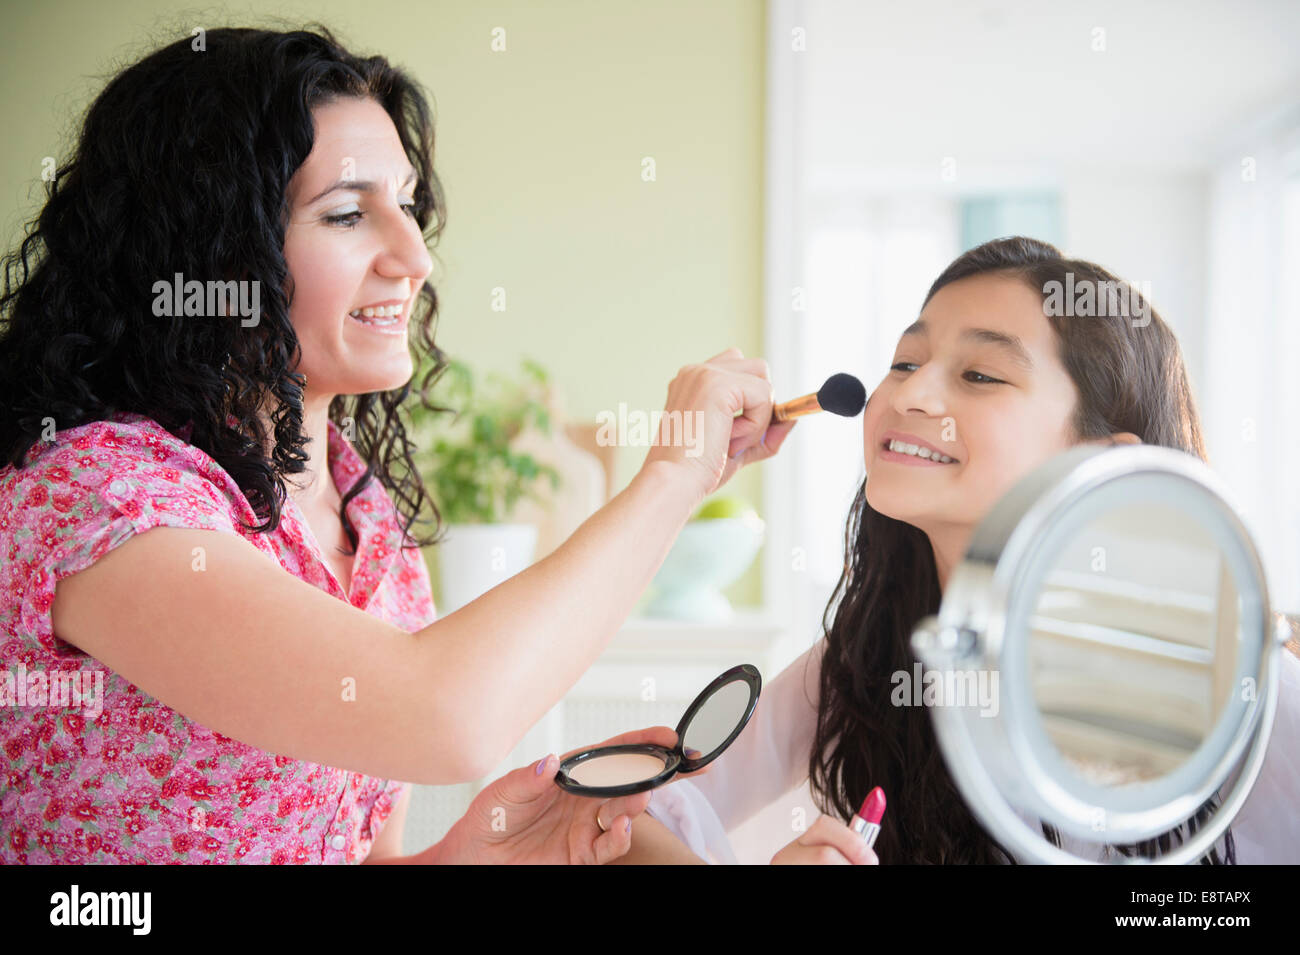 Hispanic mother helping daughter maquiller Banque D'Images